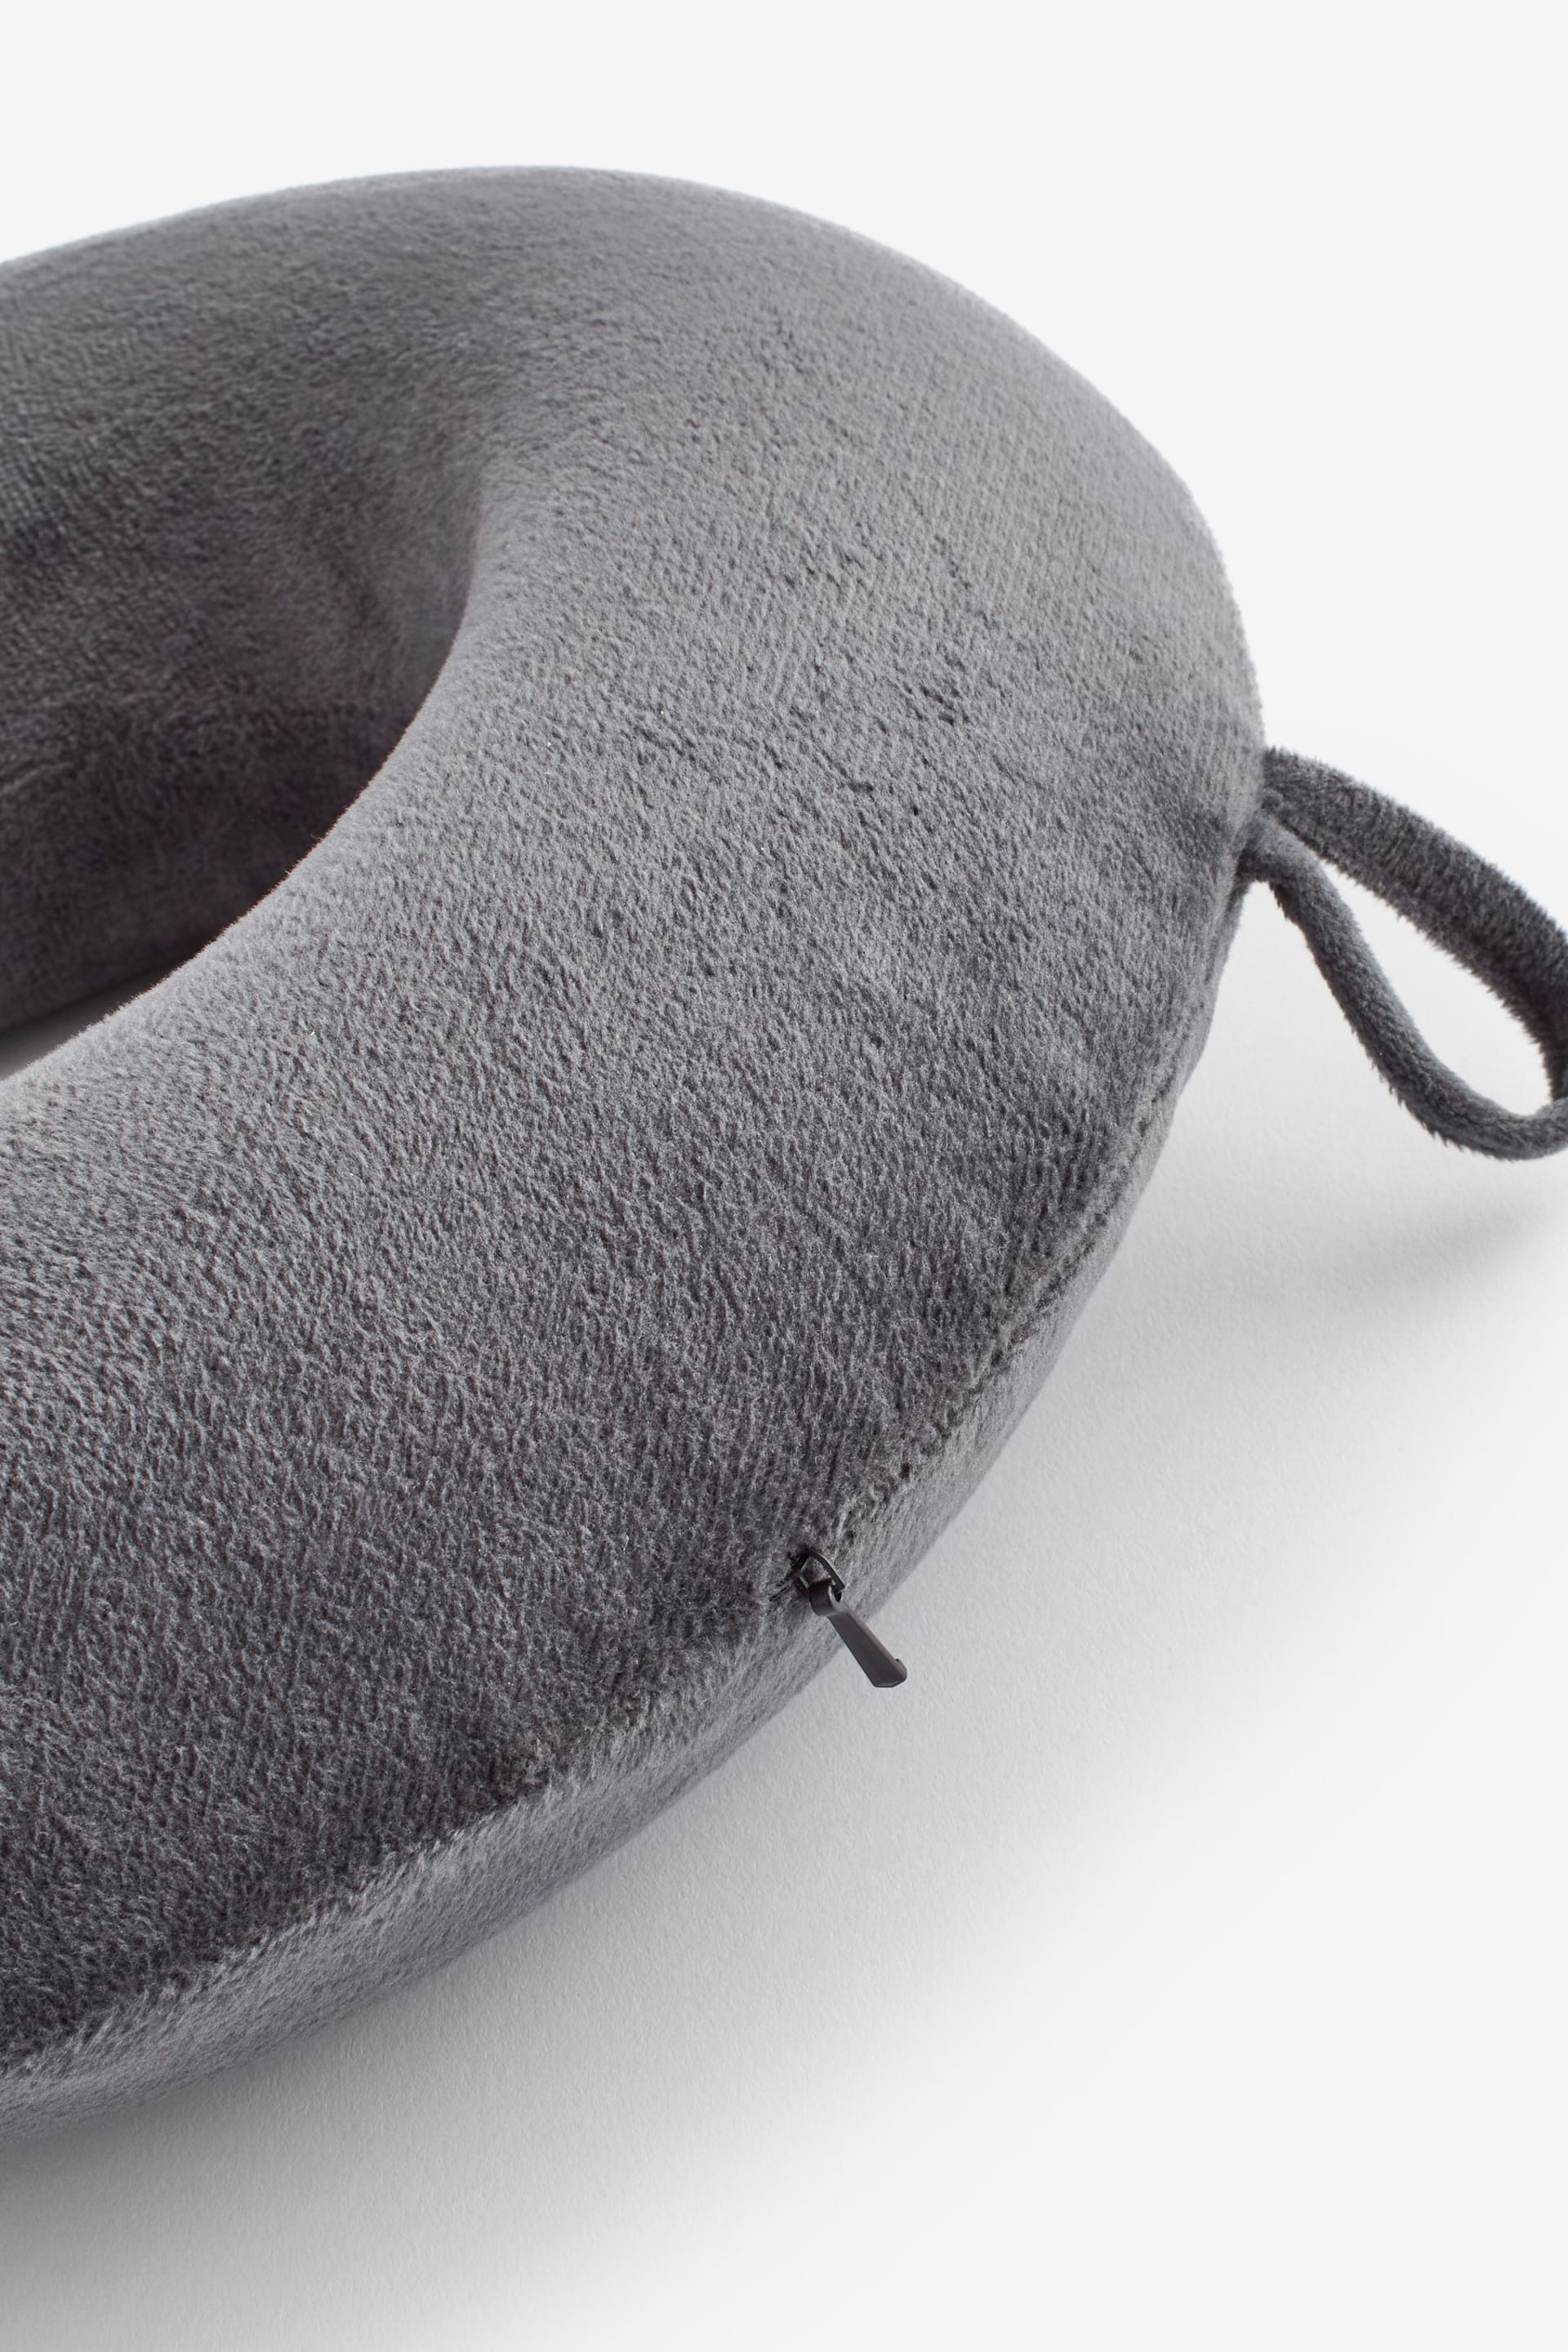 Grey Travel Neck Pillow - Image 2 of 3